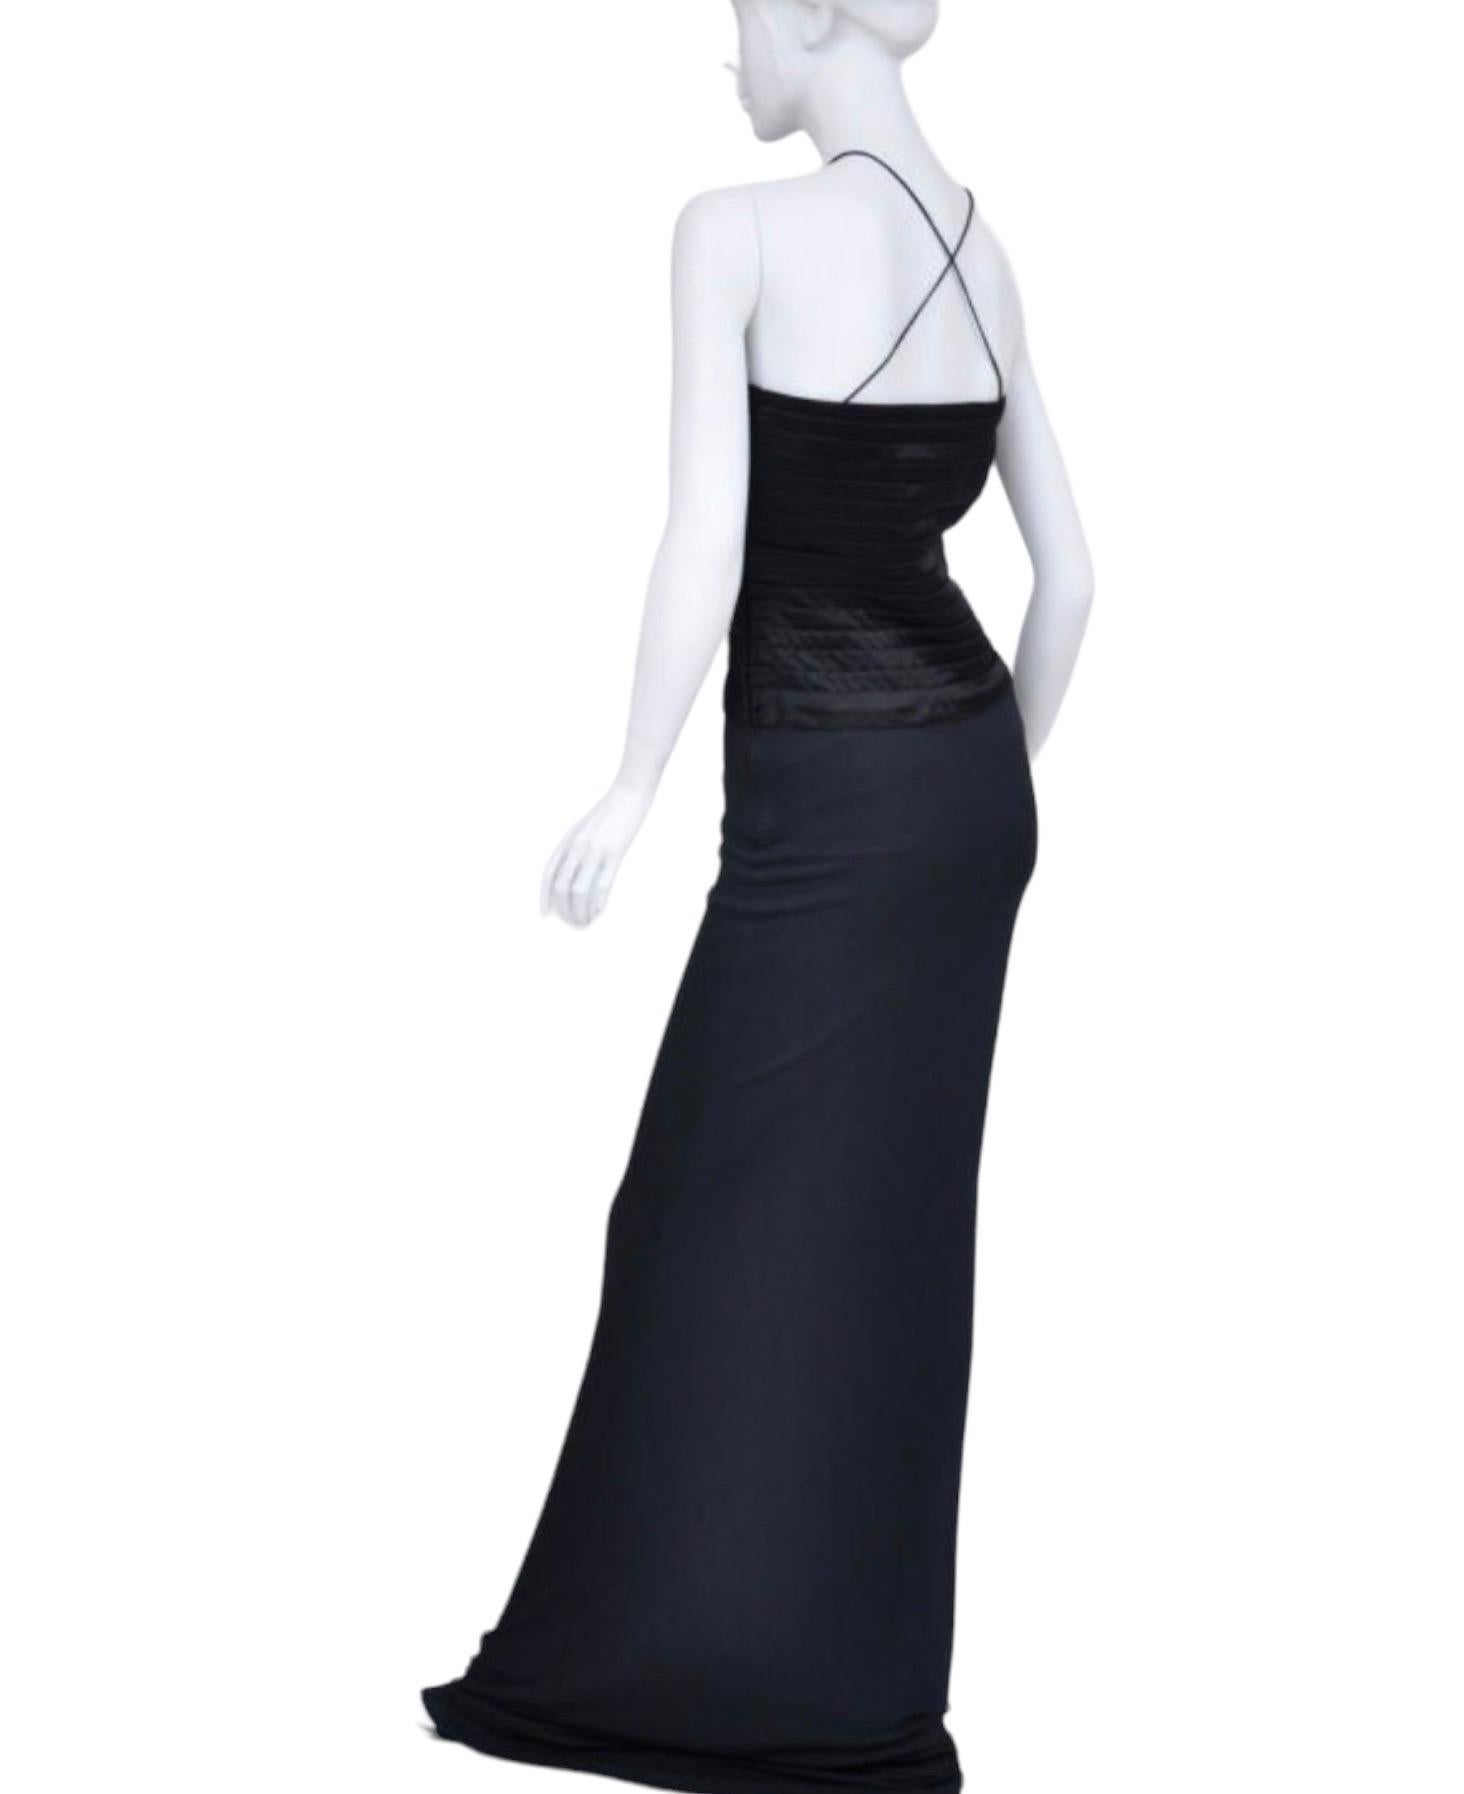 Women's F/W 2002 Vintage Tom Ford for Gucci Black Evening Gown Dress NWT! Size 42 For Sale